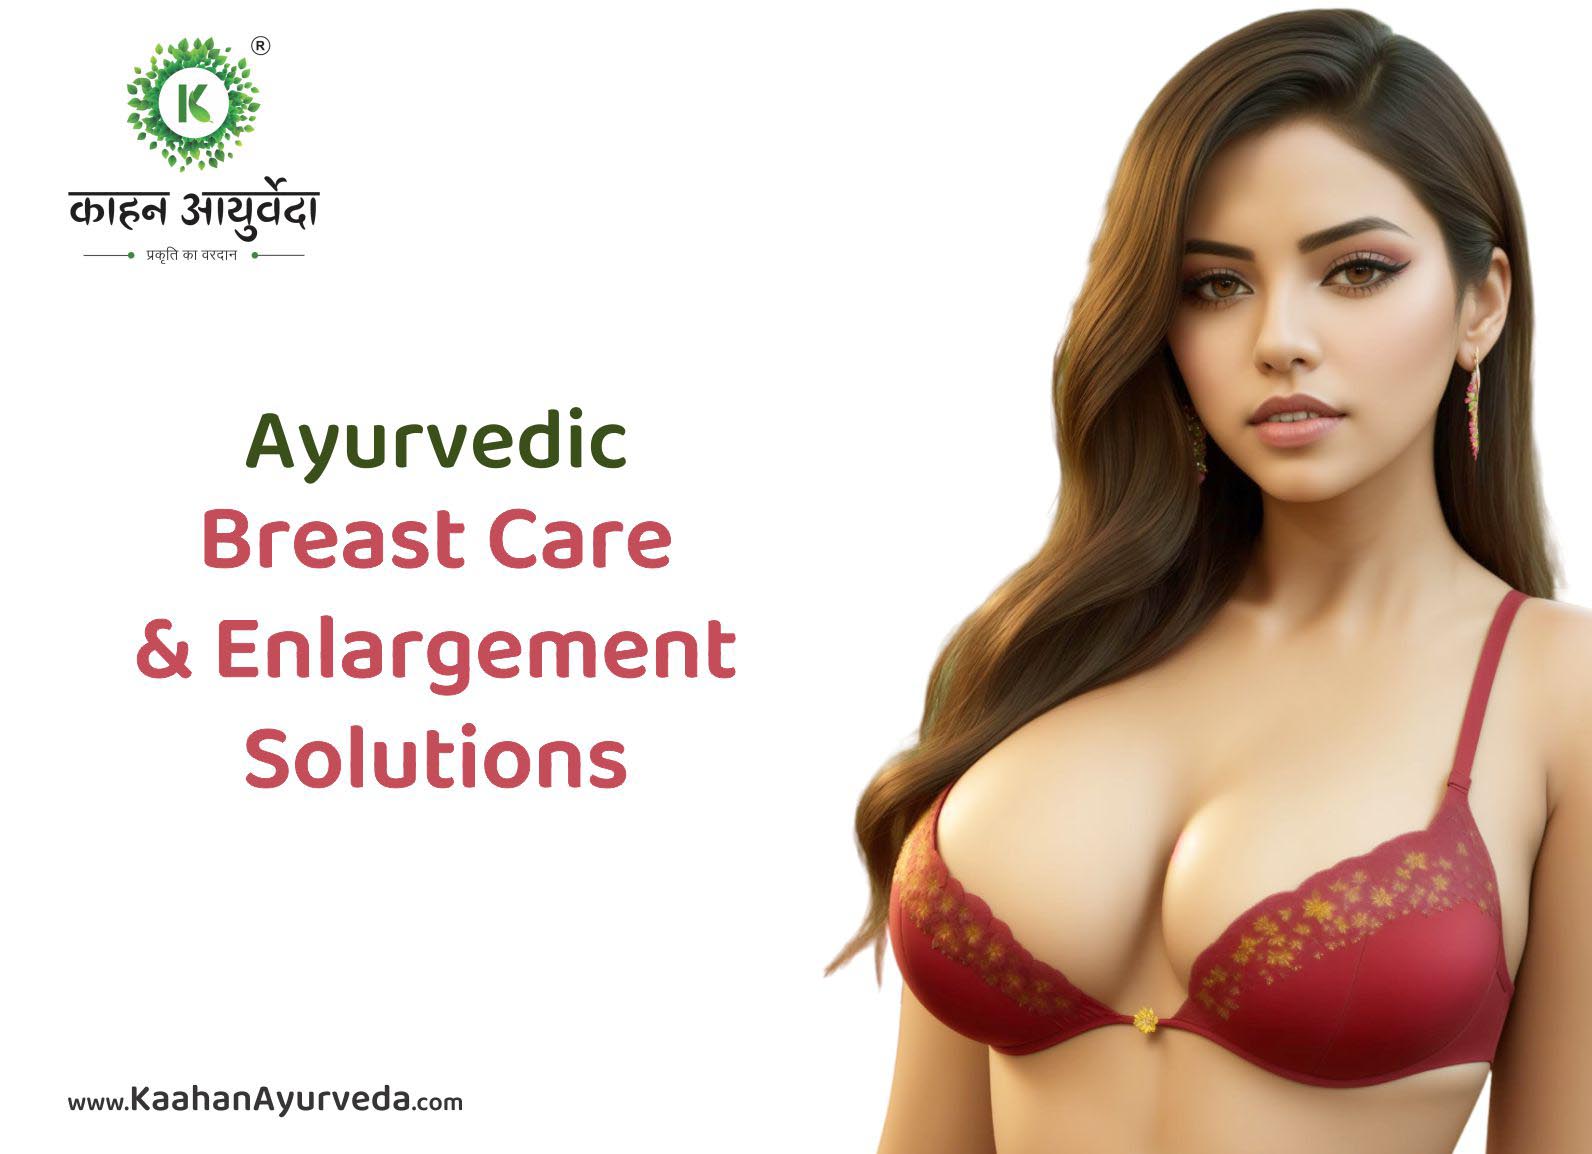 Ayurvedic Breast Care and Enlargement Solutions